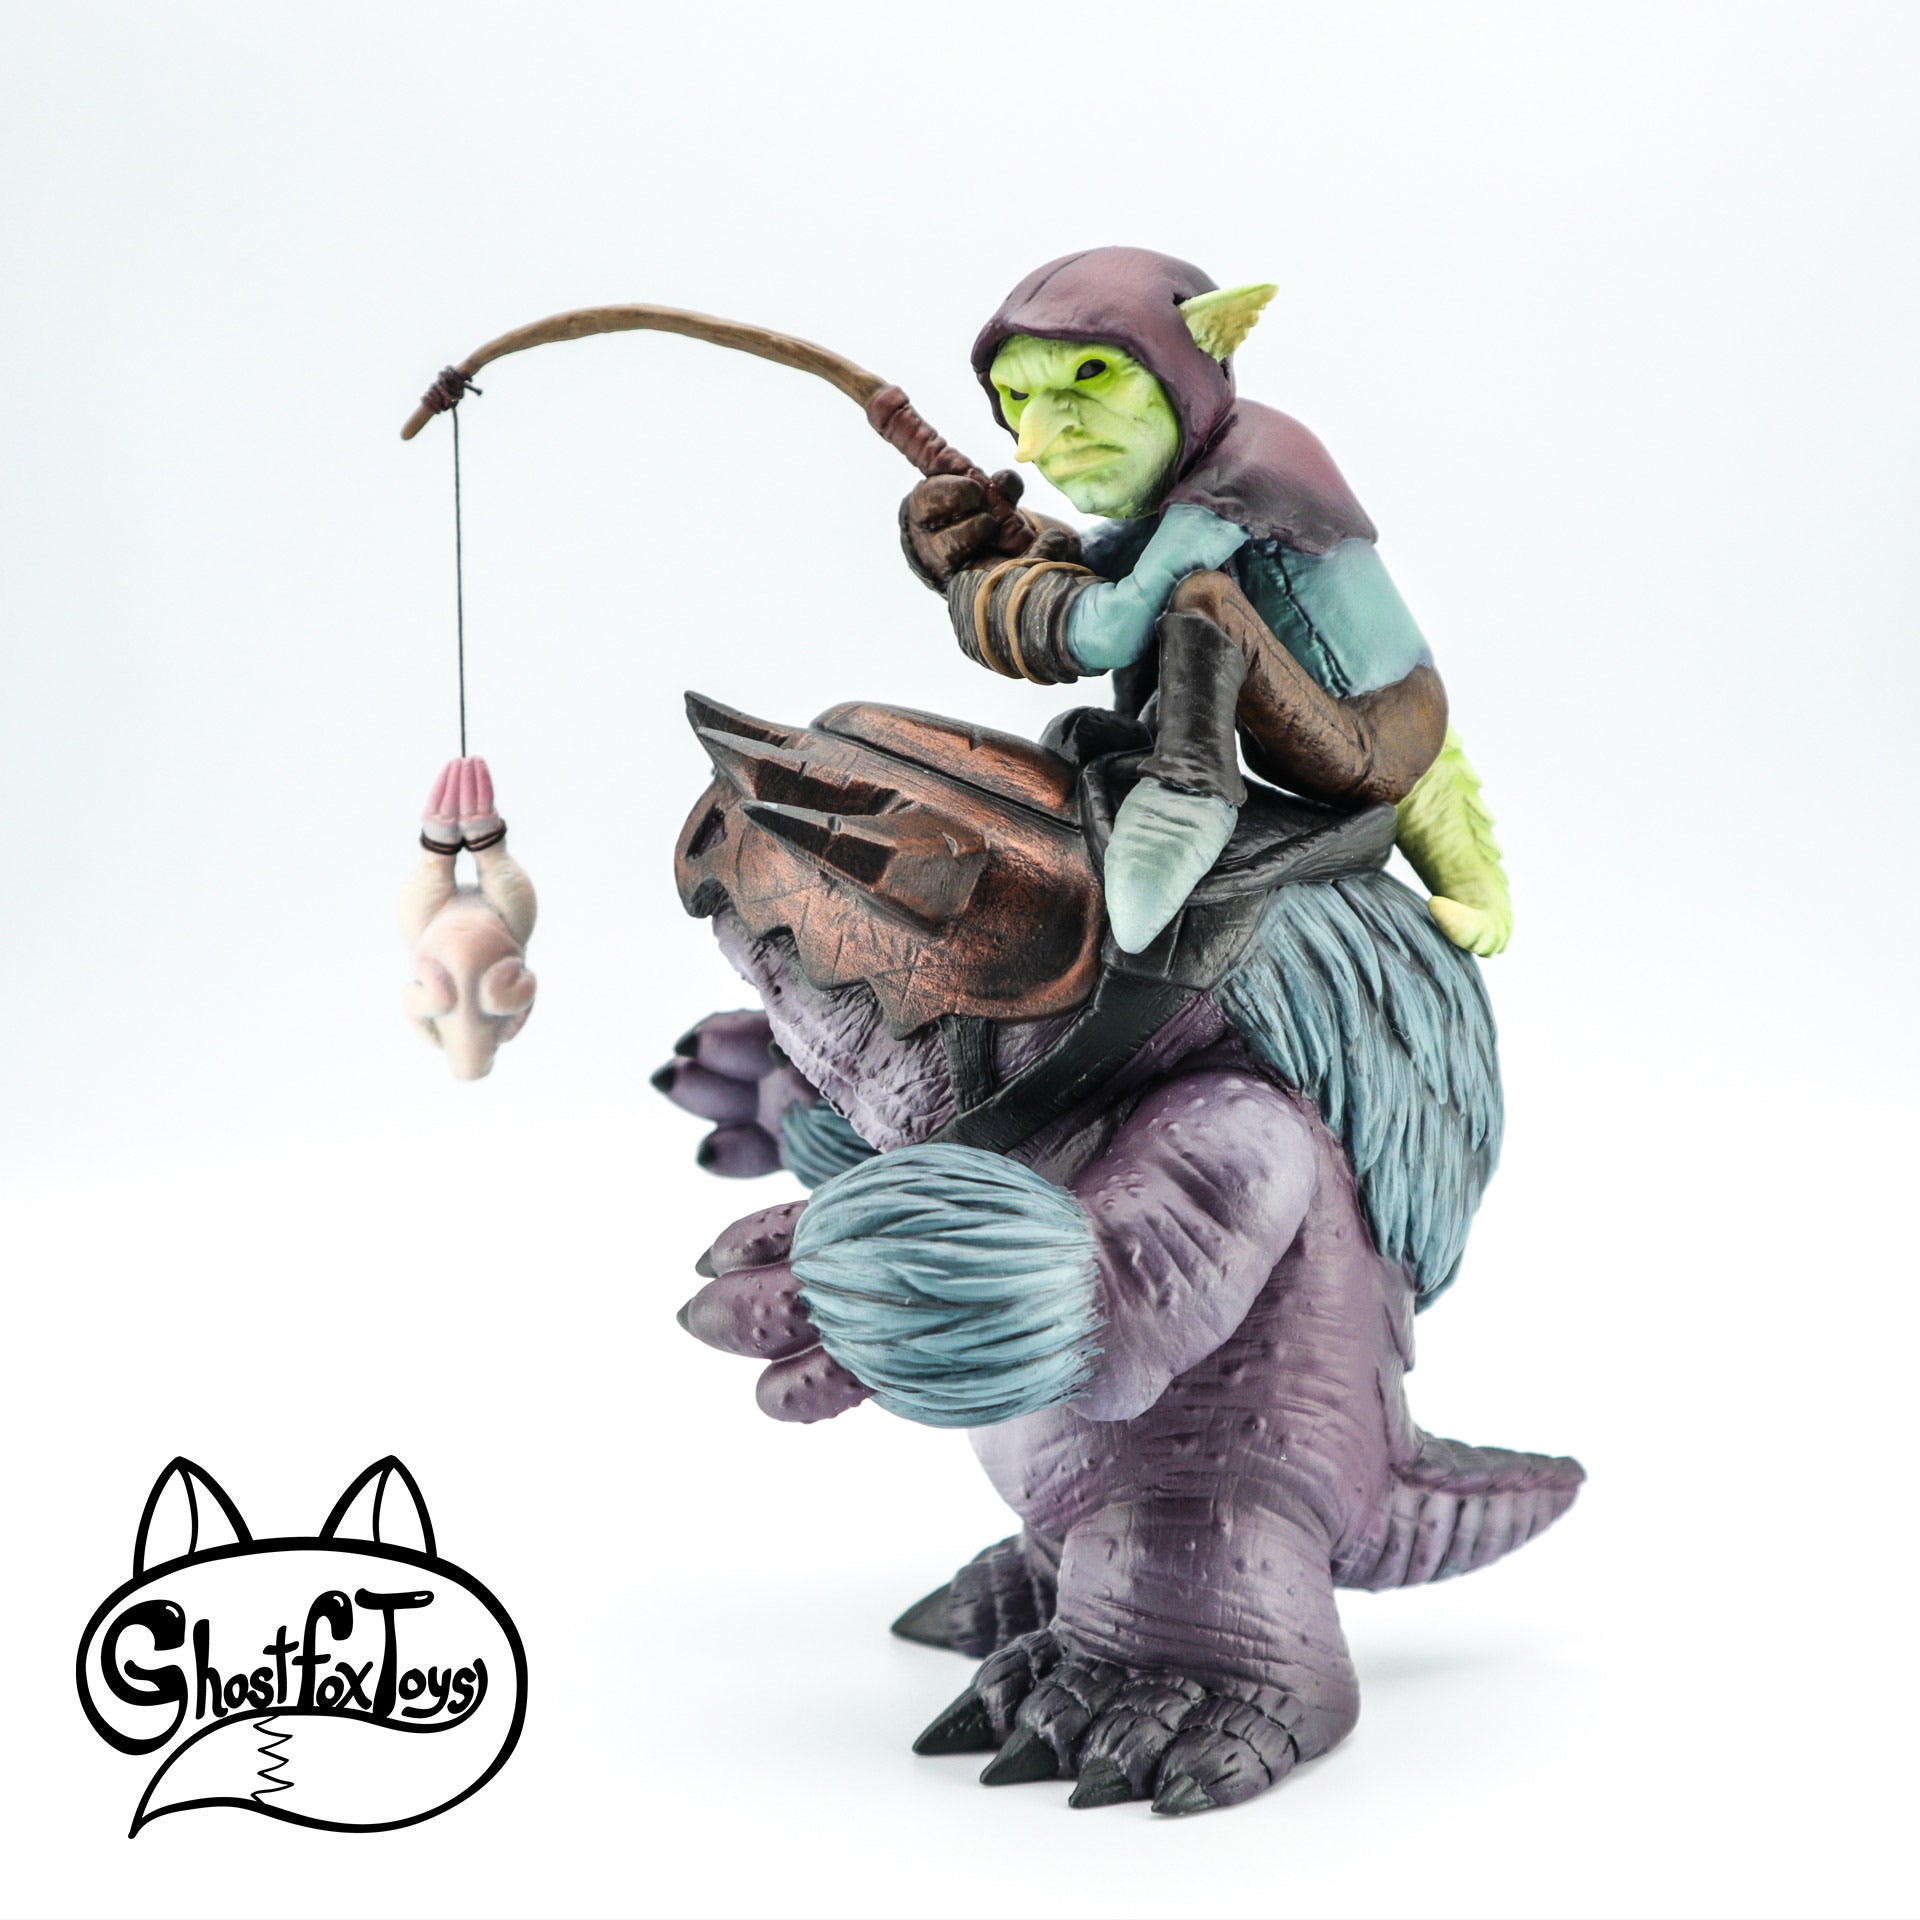 The Stroll Show - The Traveler by Ghost Fox Toys